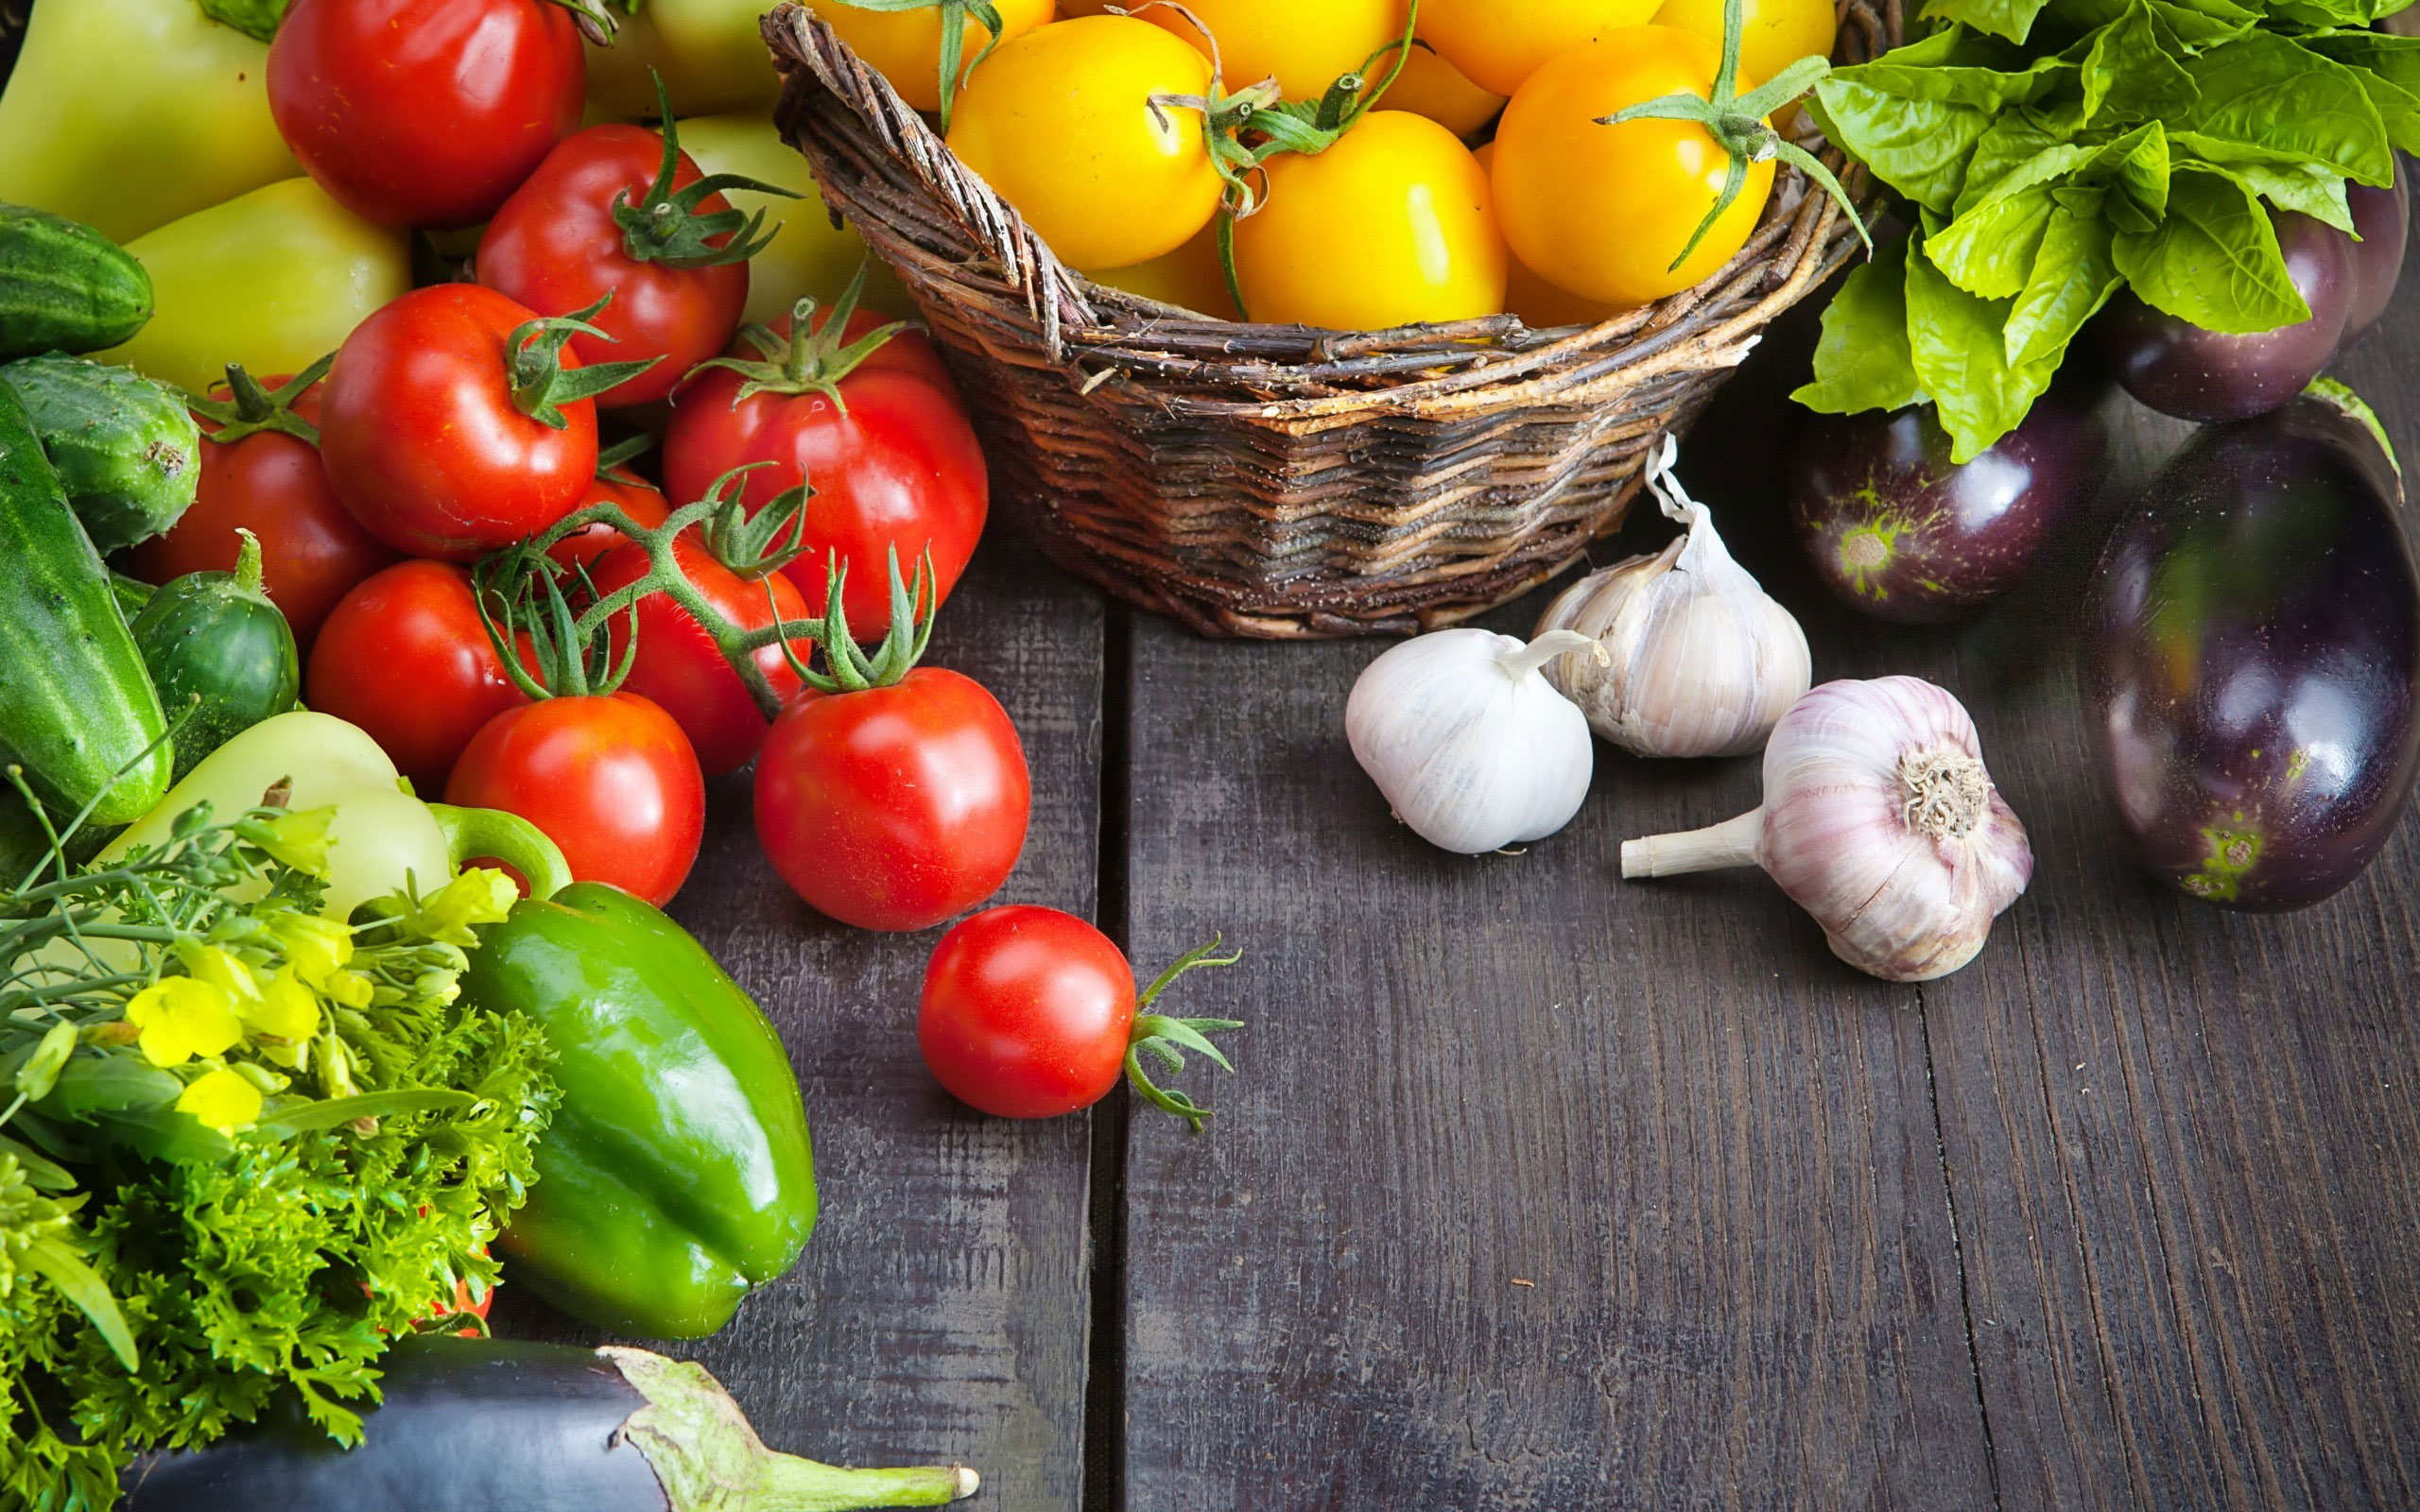 Fruits and vegetables wallpaper, food, tomatoes, eggplant